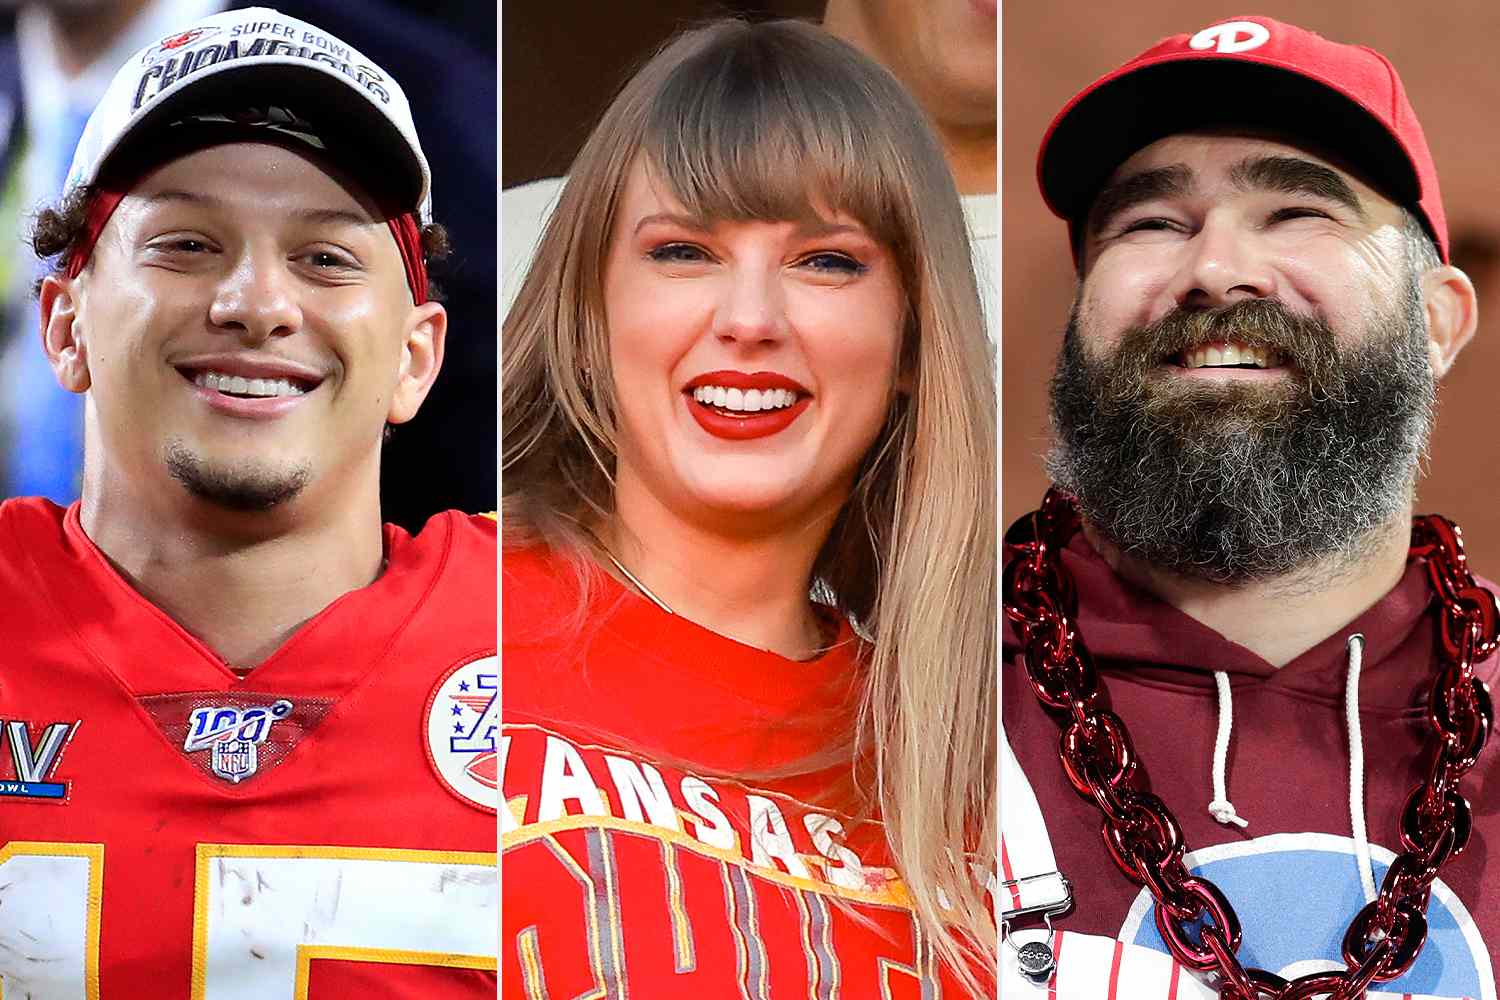 A New Interview: Patrick Mahomes says Taylor Swift is hard-working, and ‘down-to-earth’